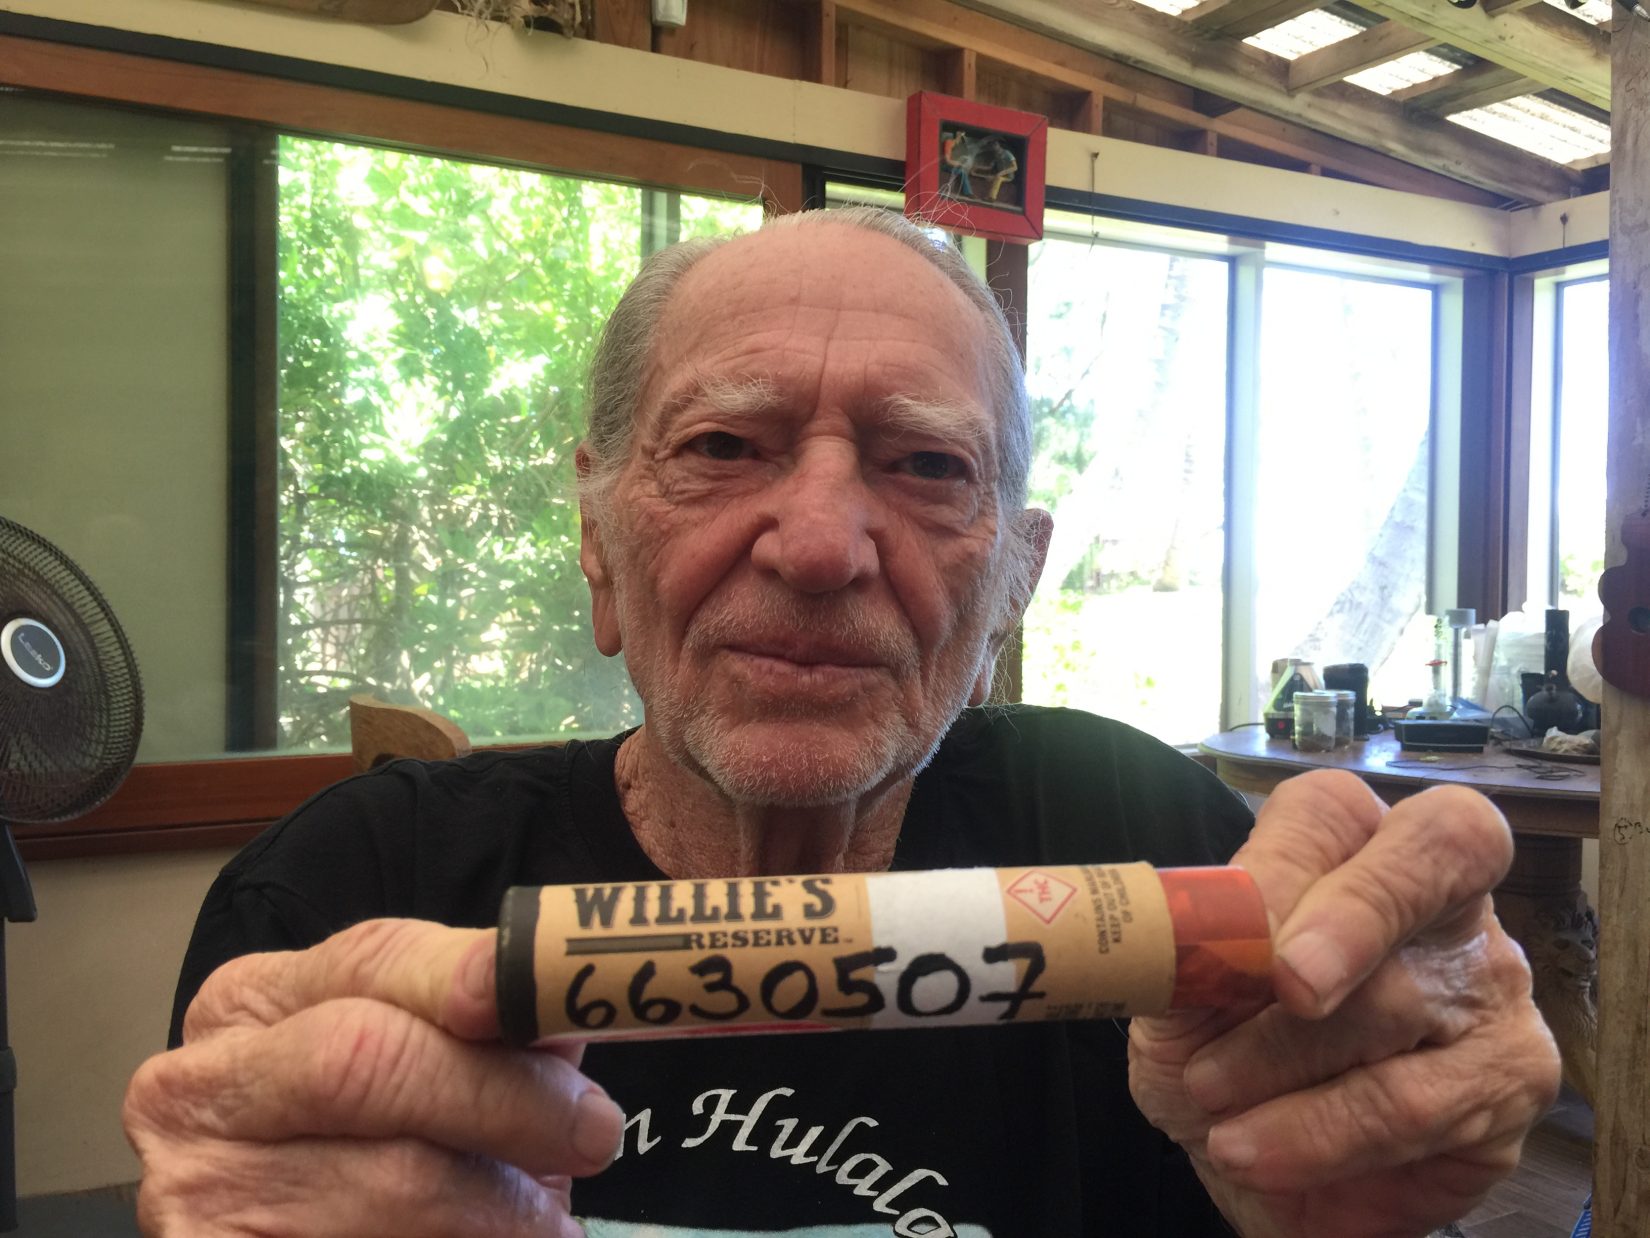 Willie Nelson holds up a container of his branded marijuana with "6630507" written on it. Following the U.S. Drug Enforcement Administration's inaction on rescheduling marijuana, legalization proponents have responded by taking to the internet to highlight Patent No. 6,630,507, which covers the potential use of non-psychoactive cannabinoids. (Photo courtesy of Willie's Reserve)